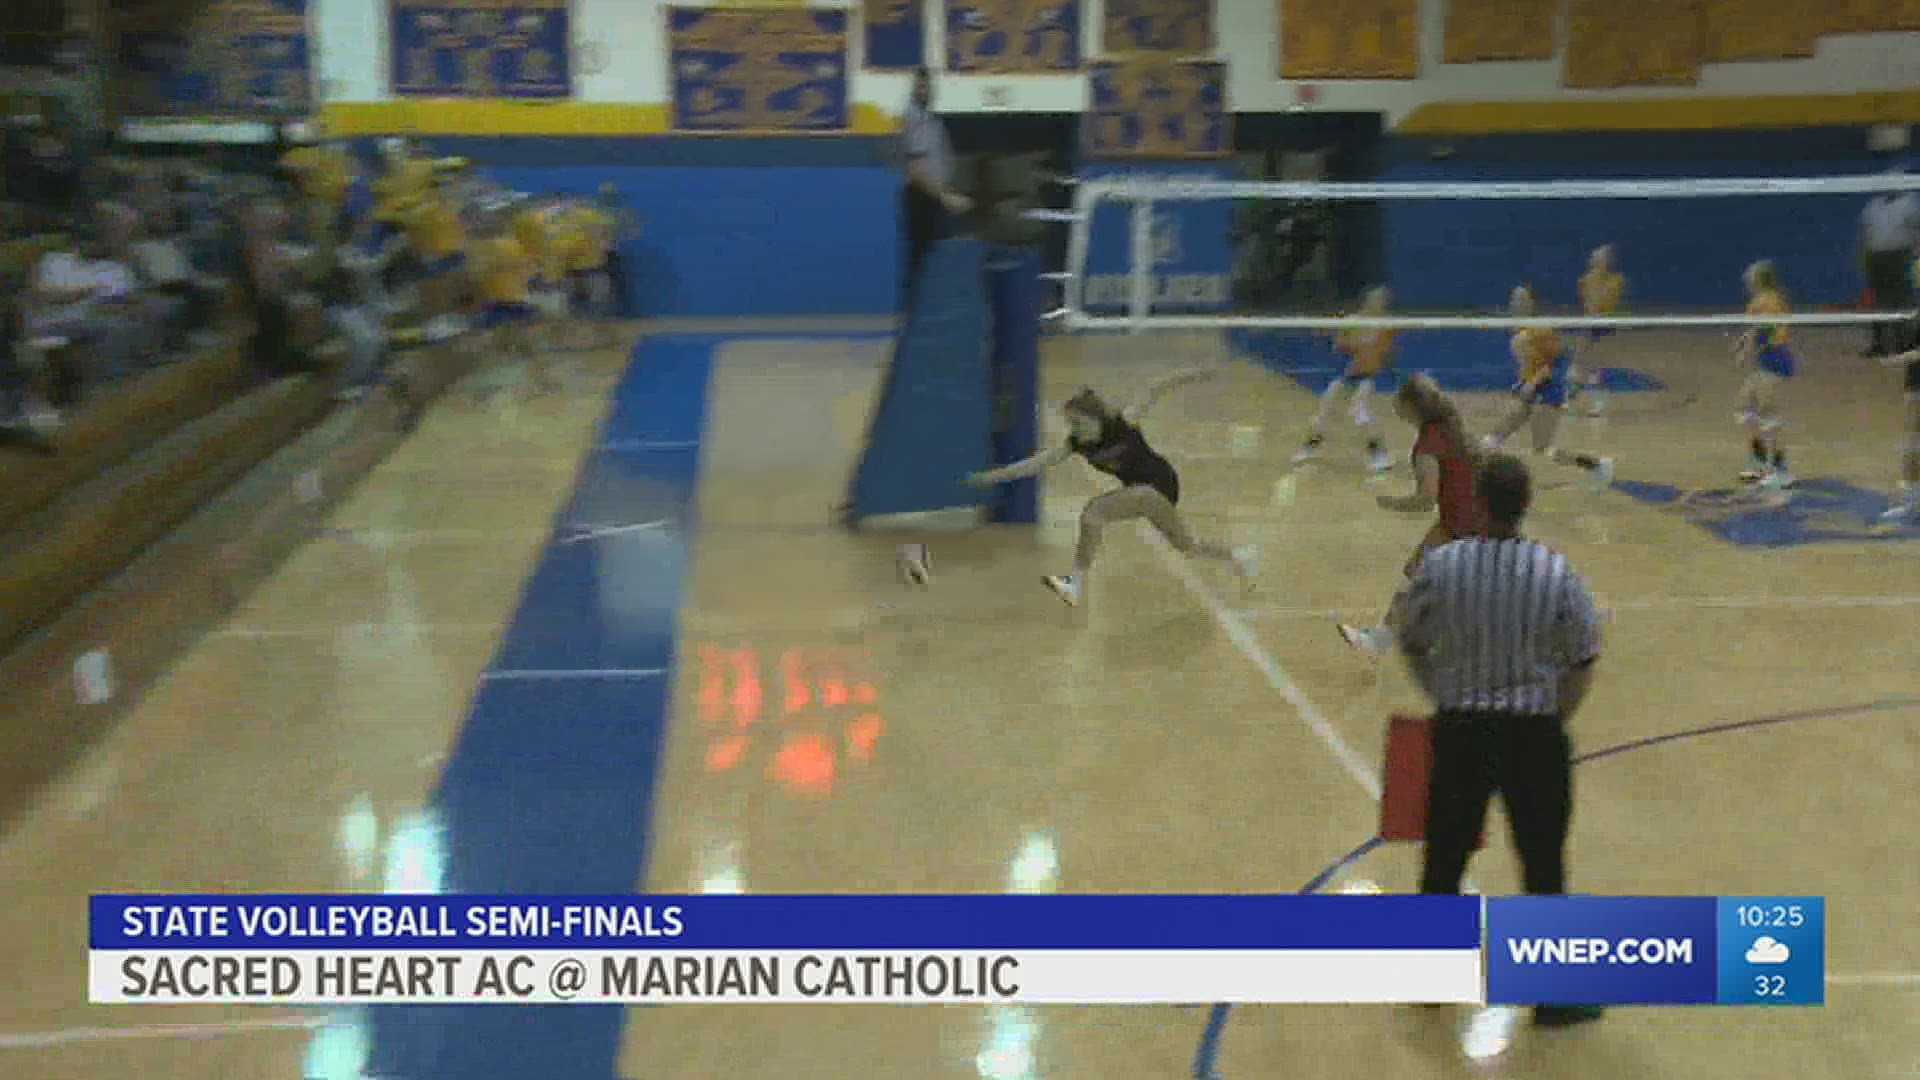 Marian Catholic looks for their 7th State Championship in girls volleyball after a thrilling five set win over Sacred Heat Academy in the semi-finals.